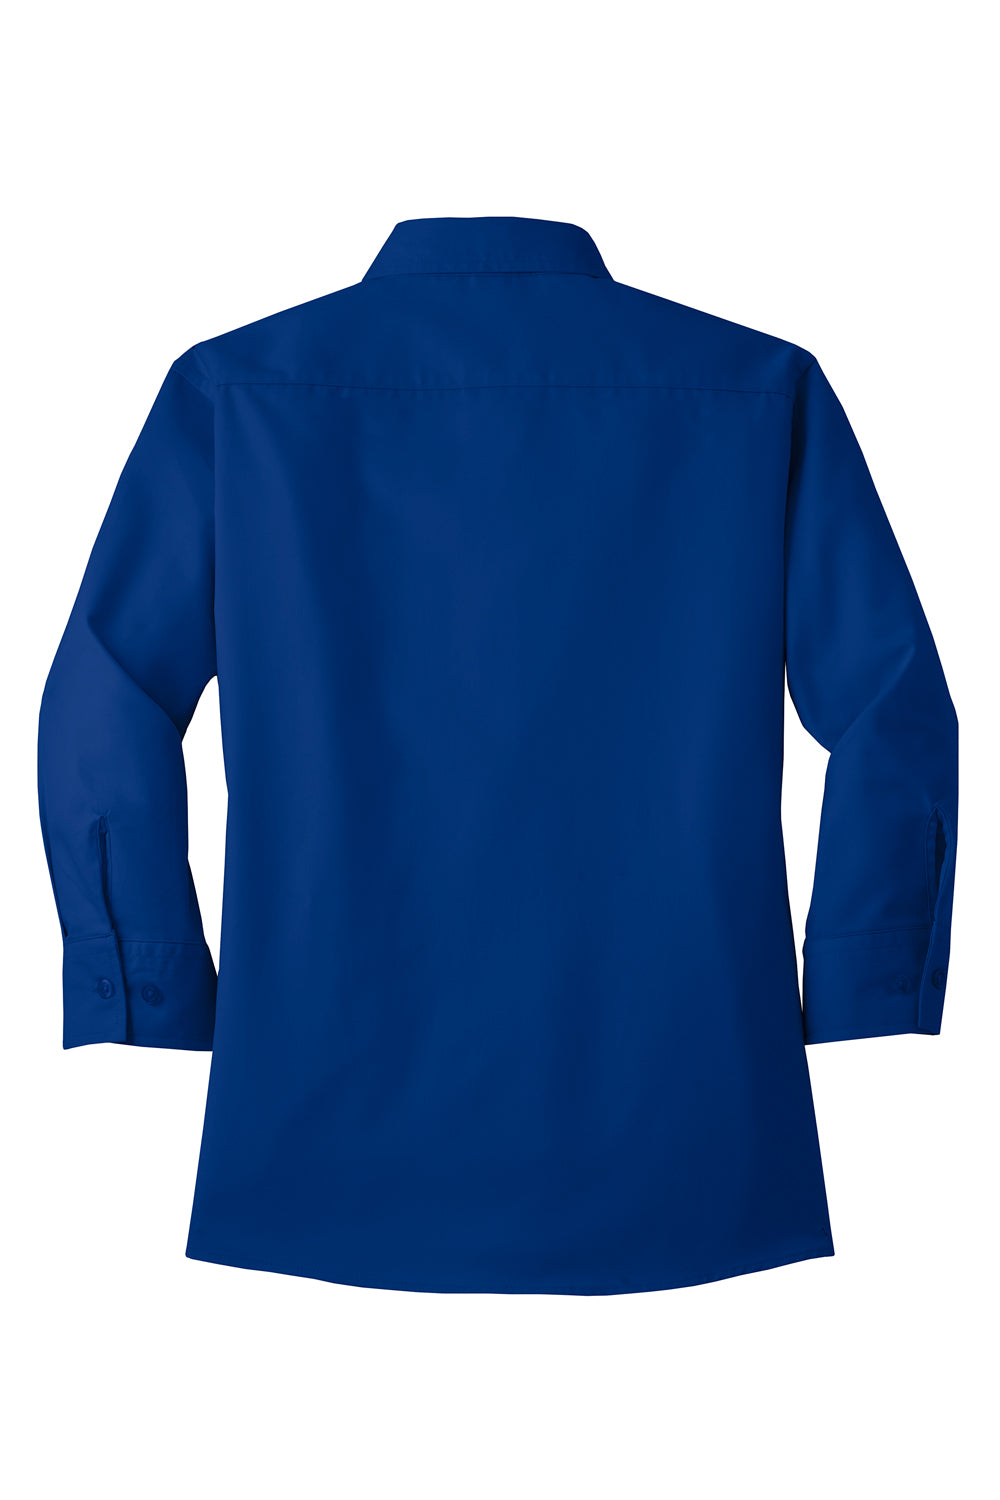 Port Authority L612 Womens Easy Care Wrinkle Resistant 3/4 Sleeve Button Down Shirt Royal Blue Flat Back